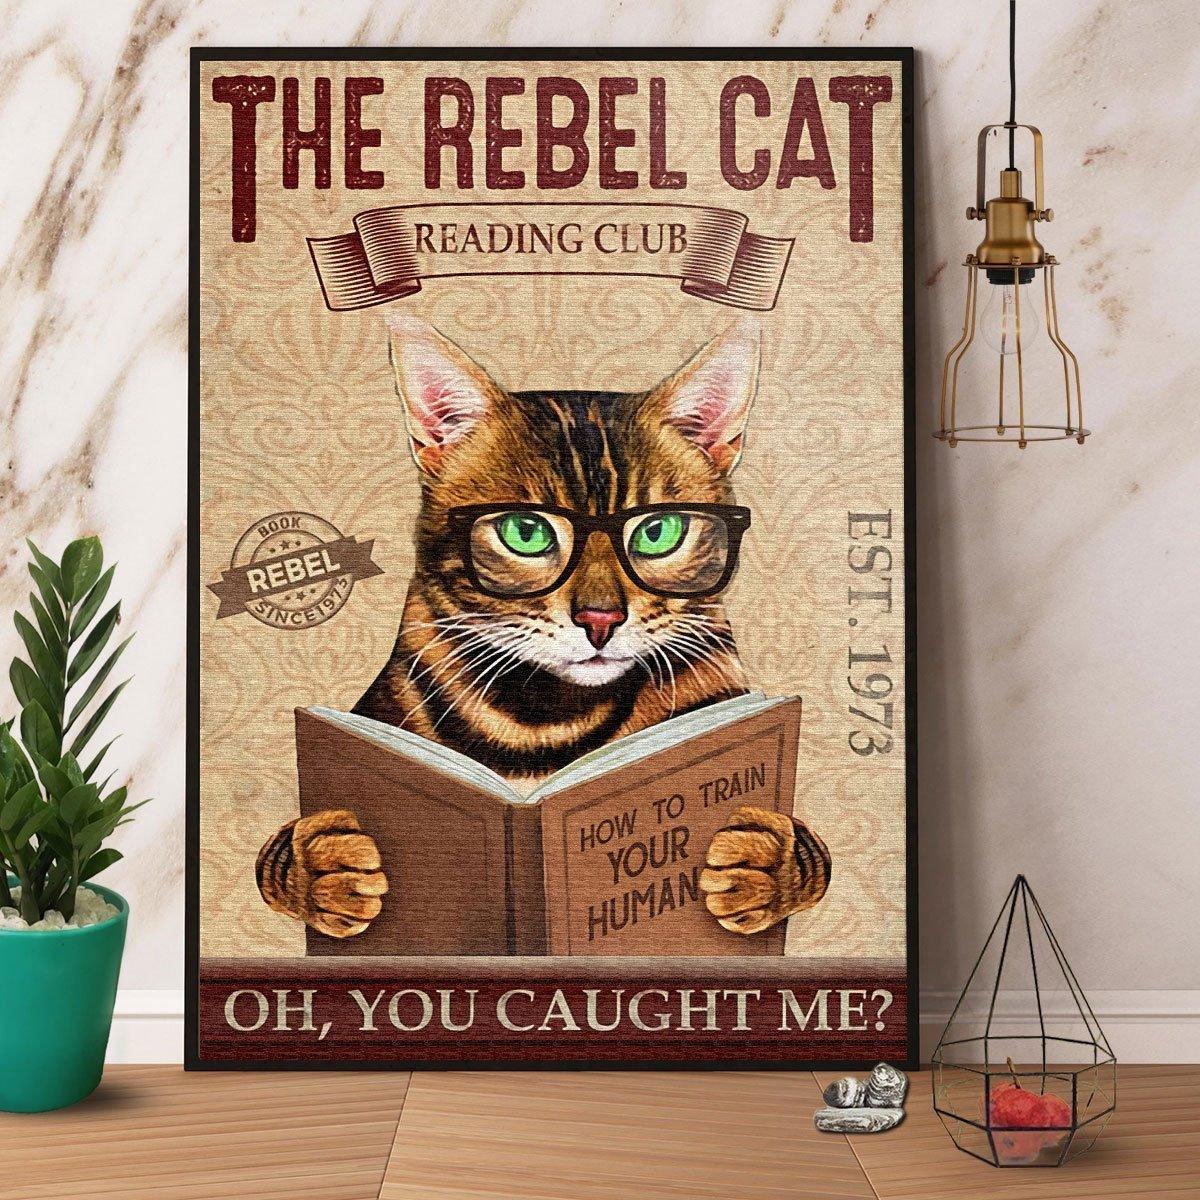 Bengal Cat Portrait Canvas - Bengal Cat Reading Club You Caught Me - Great Gift For Family, Bengal Cat Lovers, Owners, Cat Lovers - Amzanimalsgift